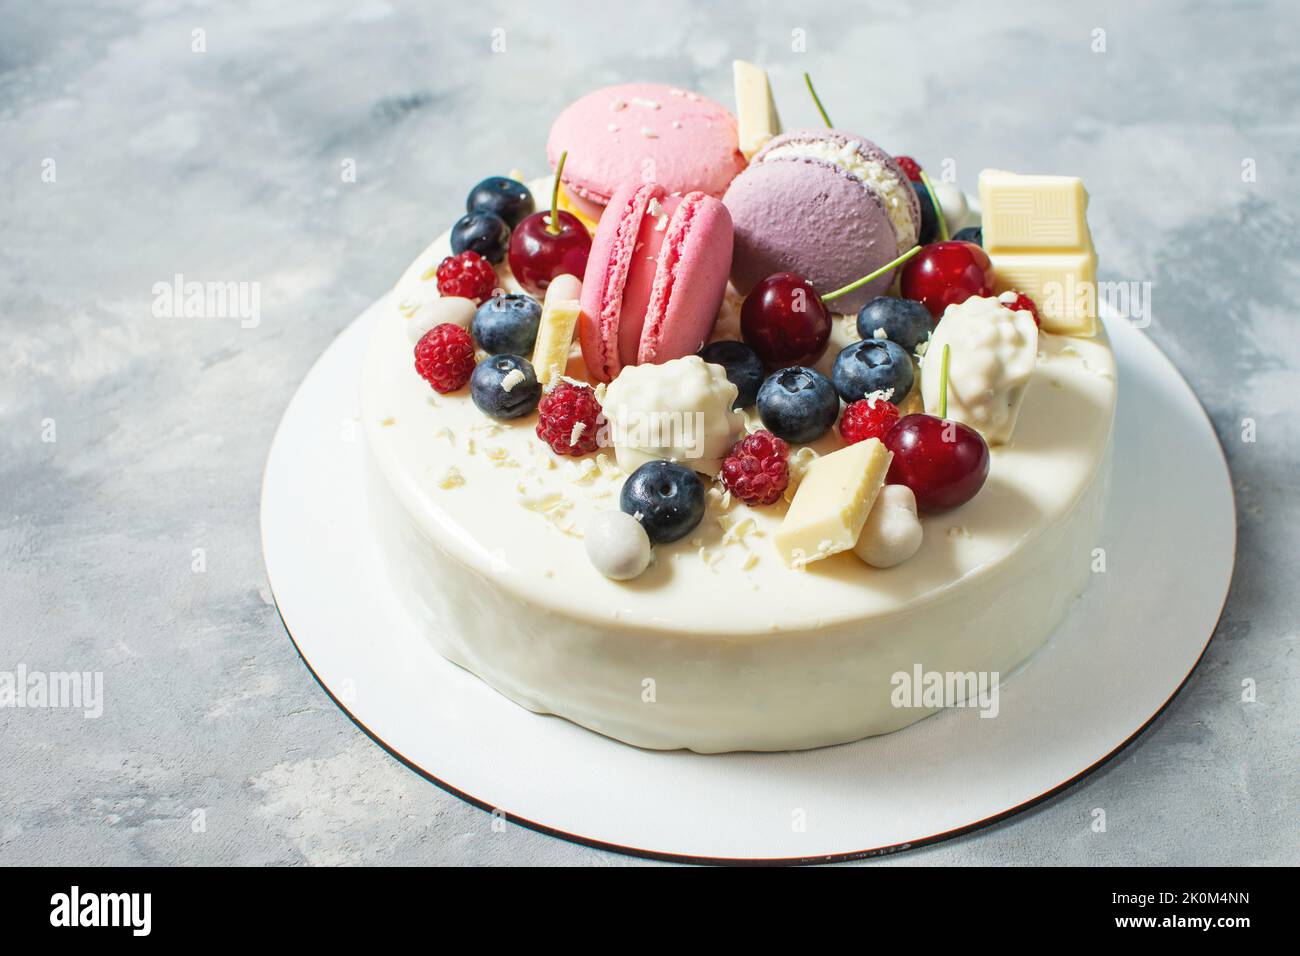 Tender white cake decorated with melted white chocolate, macaroons, meringues, berries and candies on concrete background. Stock Photo